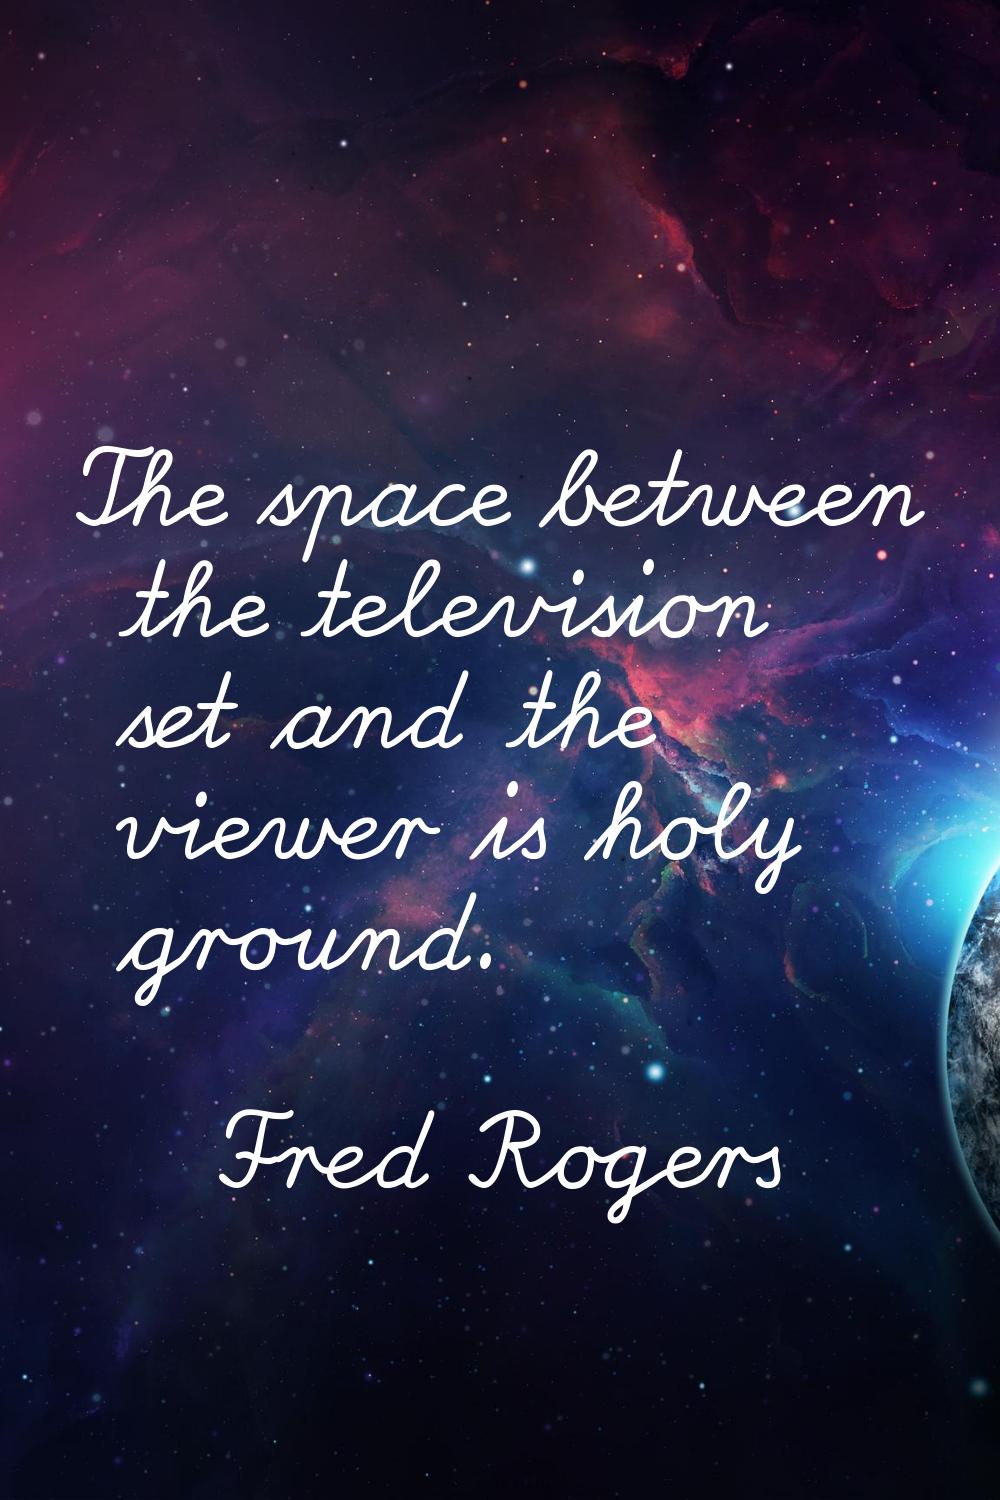 The space between the television set and the viewer is holy ground.